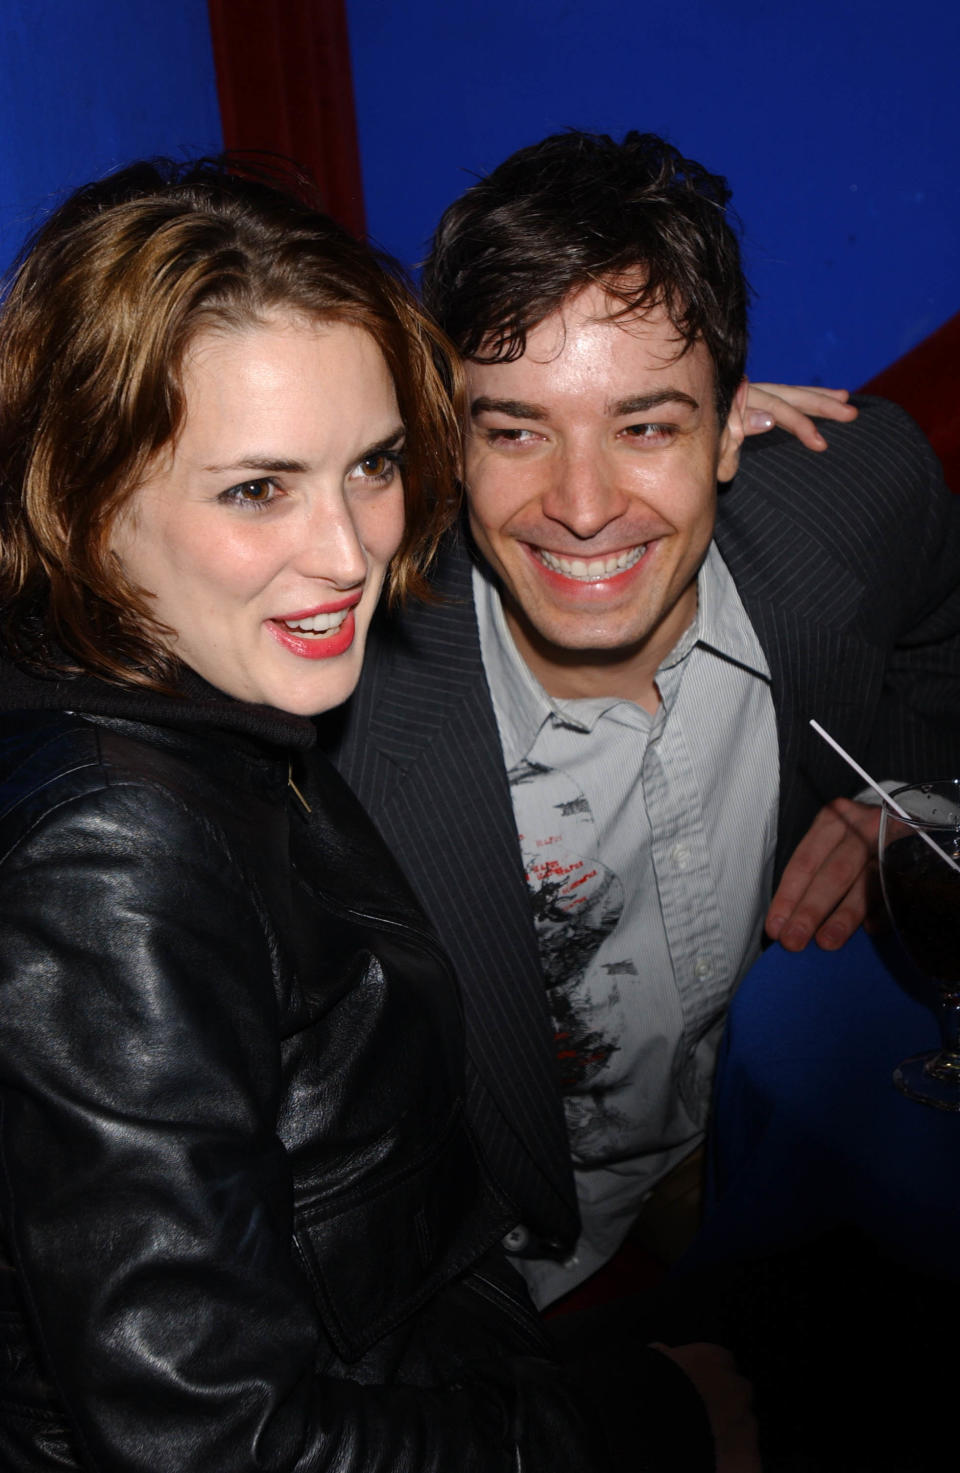 Winona Ryder and Jimmy Fallon were reportedly linked in 2002, though <a href="http://www.wmagazine.com/celebrities/archive/winona_ryder">she denied a relationship in W magazine</a> that same year: "I do date once in a while, and I've gone out with wonderful people in the past. Although not with Jimmy Fallon, who everyone thinks is my boyfriend. We're just great friends."